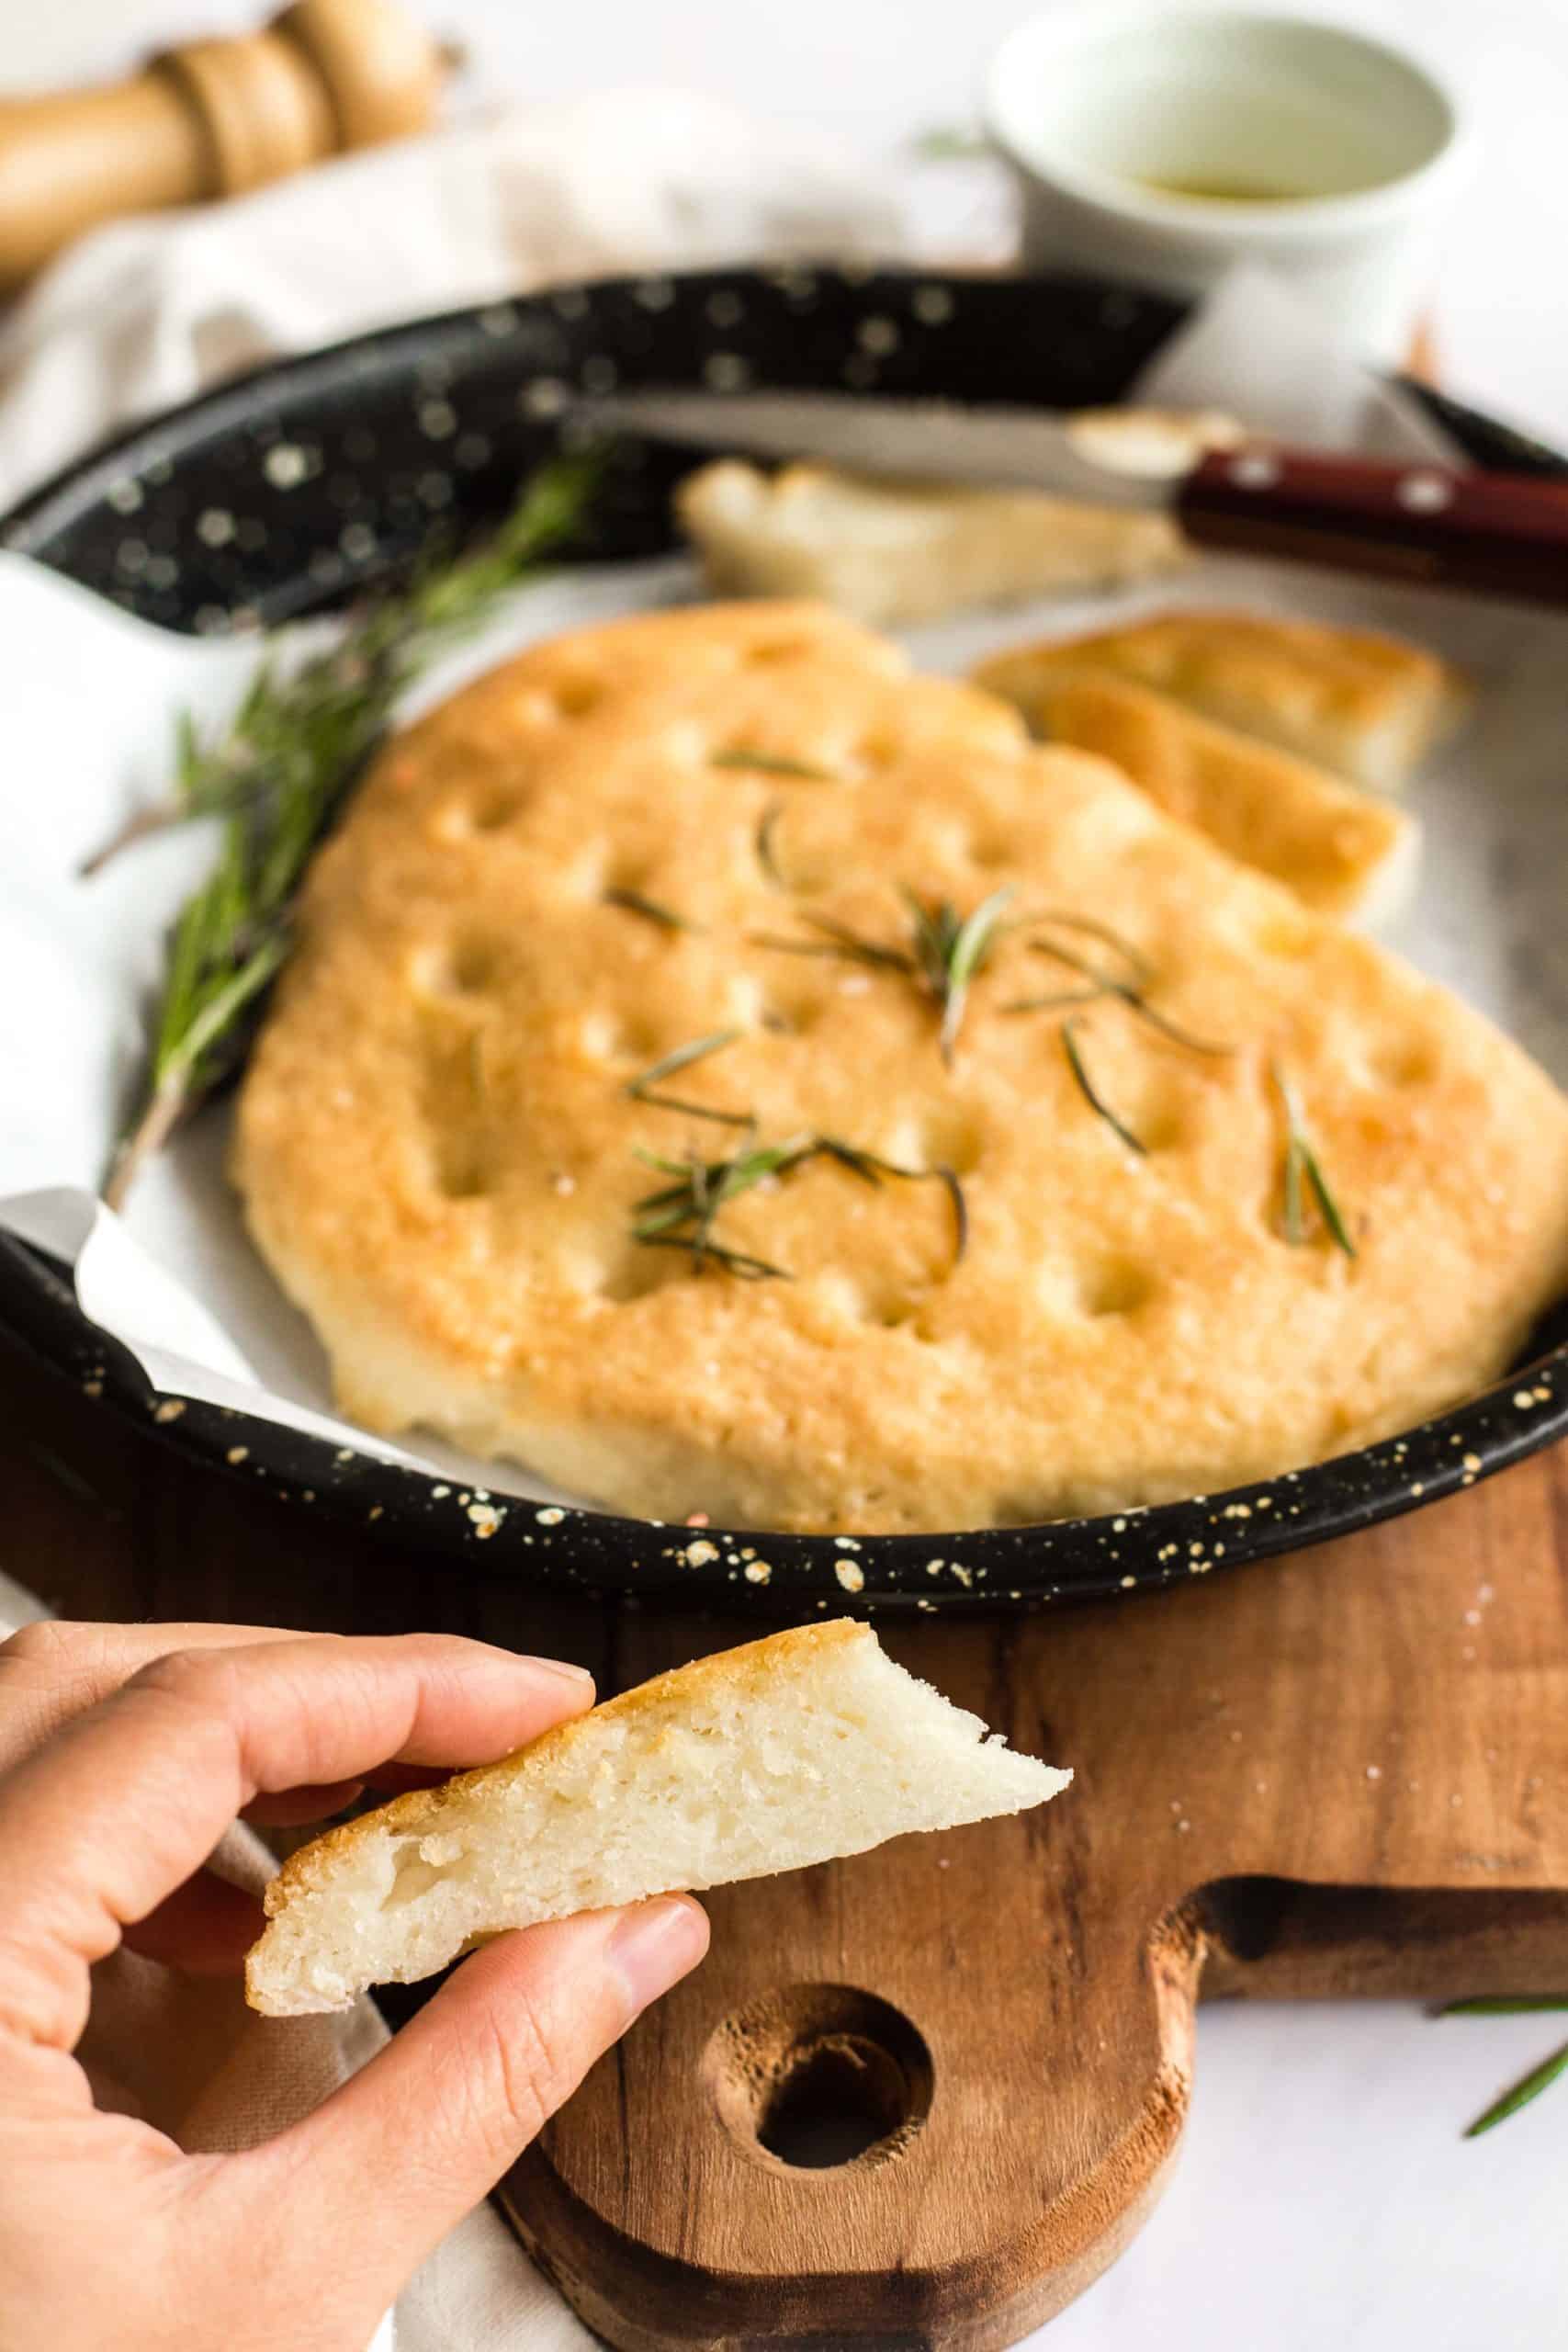 Hand holding a slice of gluten-free rosemary focaccia.